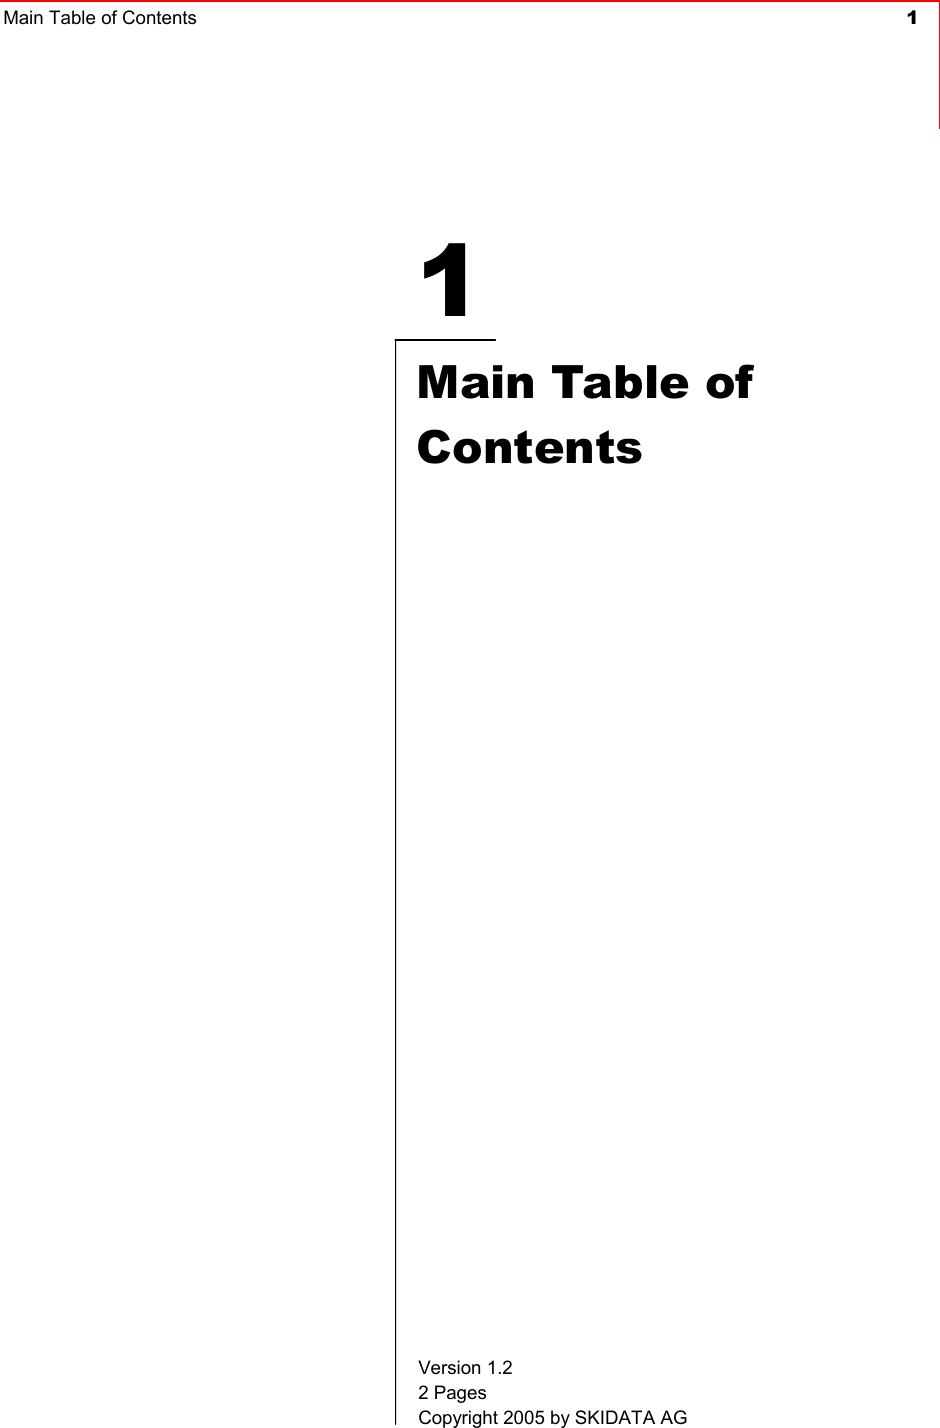 Main Table of Contents  1     1  Main Table of Contents Version 1.2 2 Pages Copyright 2005 by SKIDATA AG 